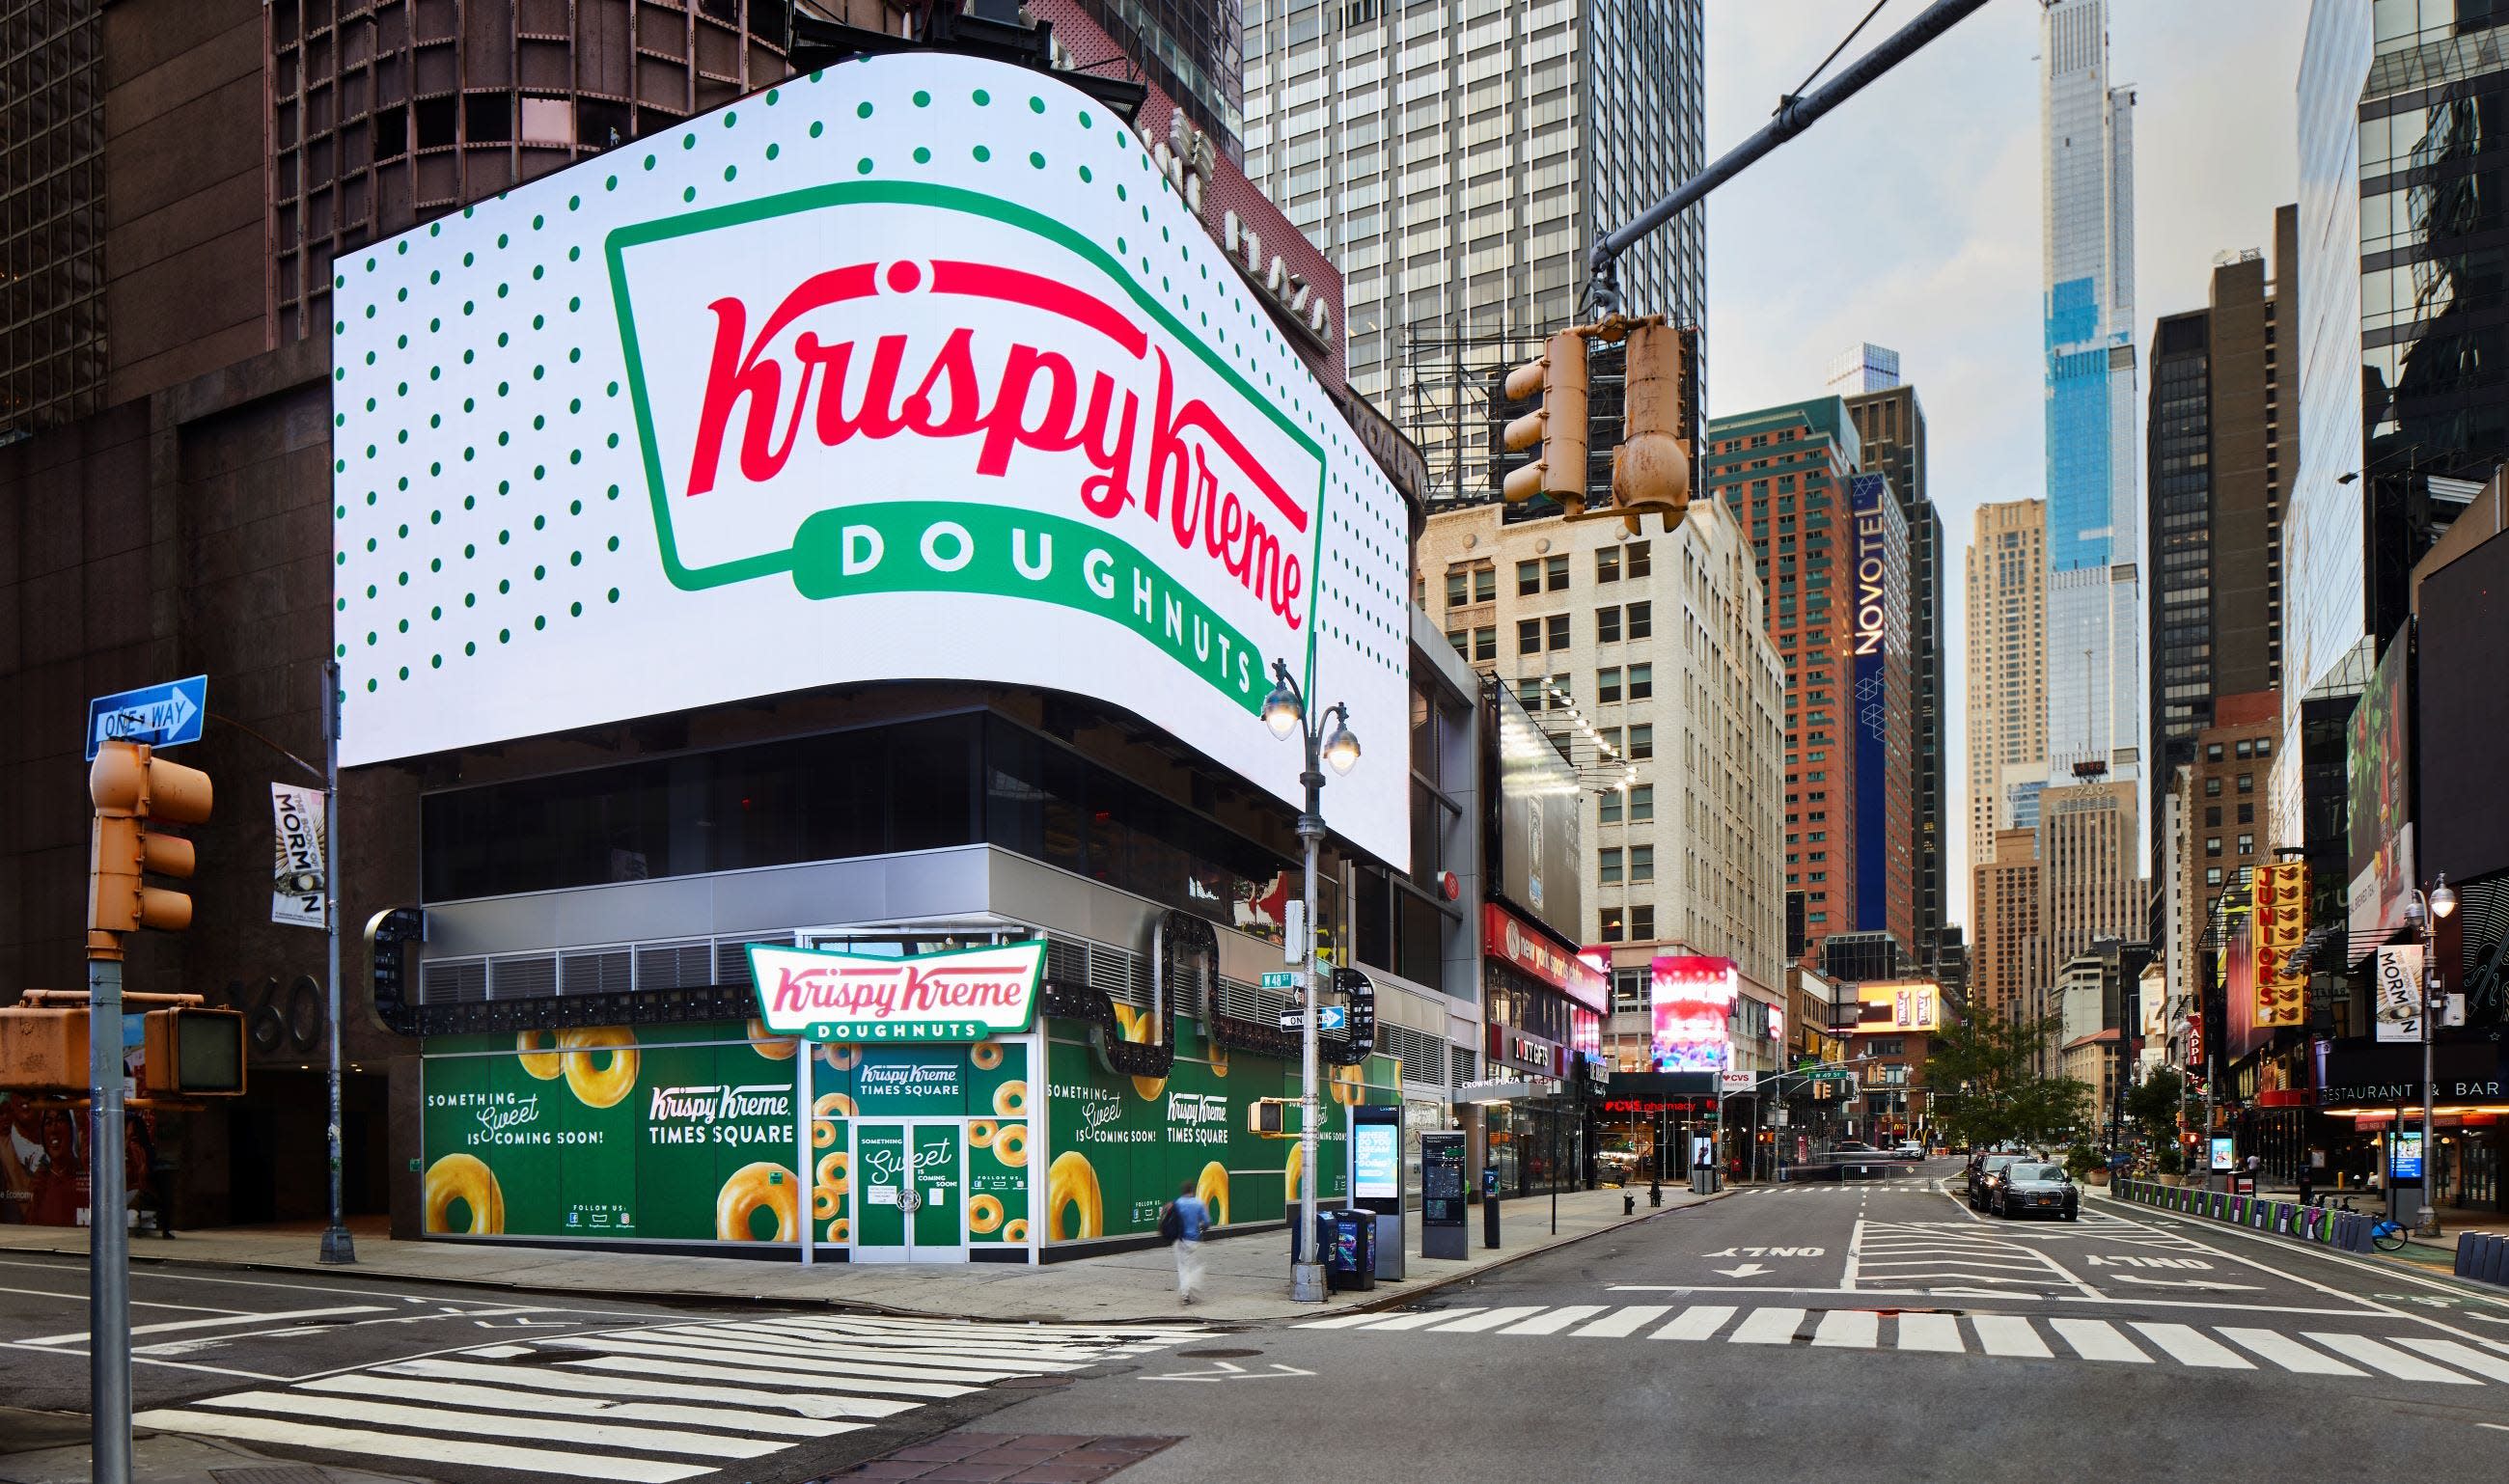 Krispy Kreme to open NYC flagship location next month with world’s largest ‘Hot Light’ after COVID-19 delay